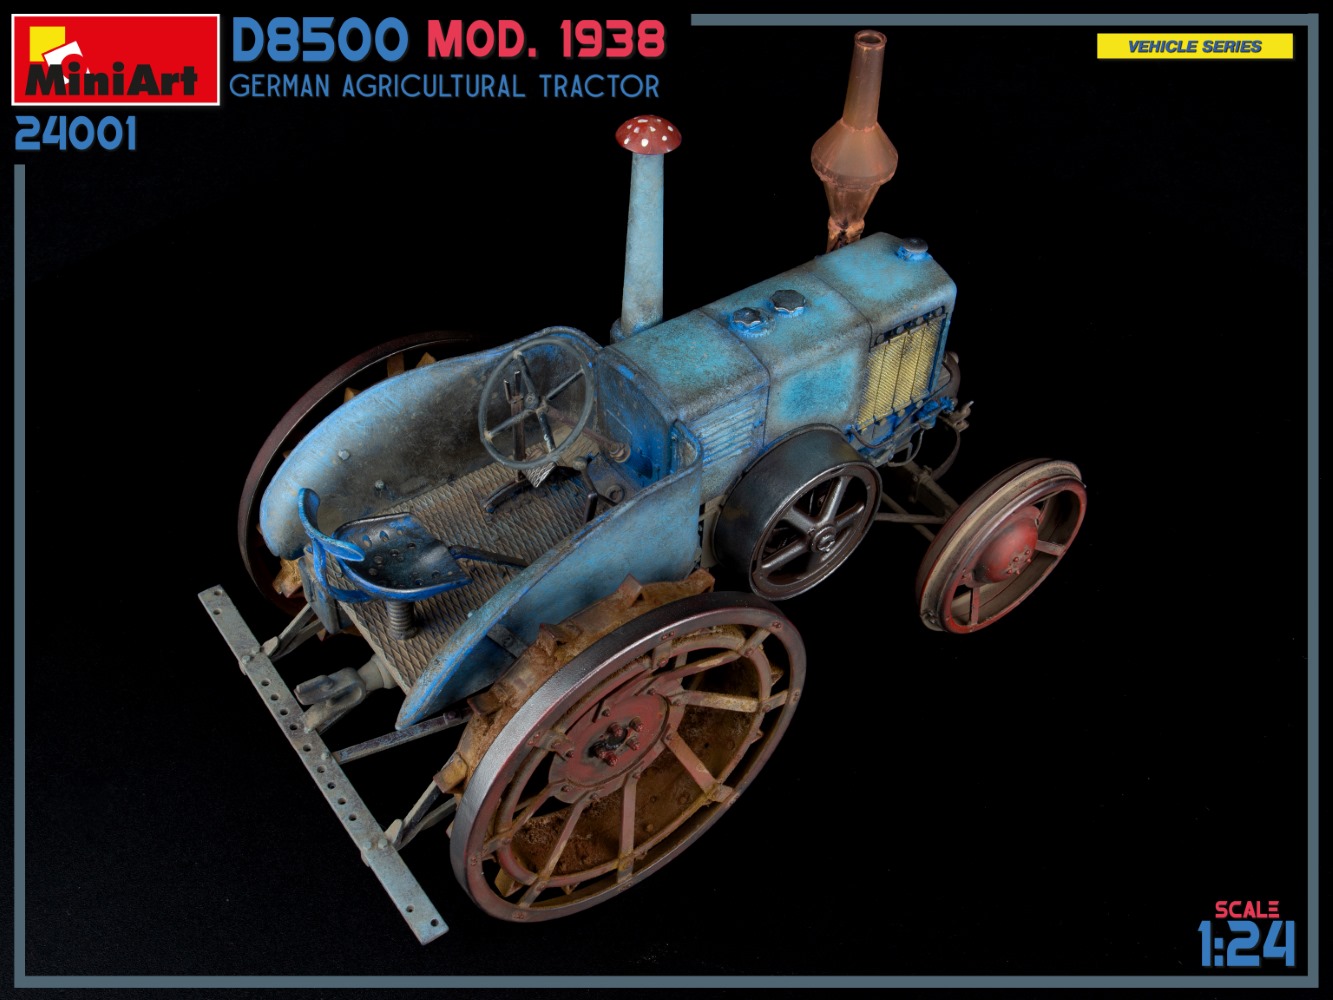 New Photos of Kit: 24001 GERMAN AGRICULTURAL TRACTOR D8500 MOD. 1938  Miniart